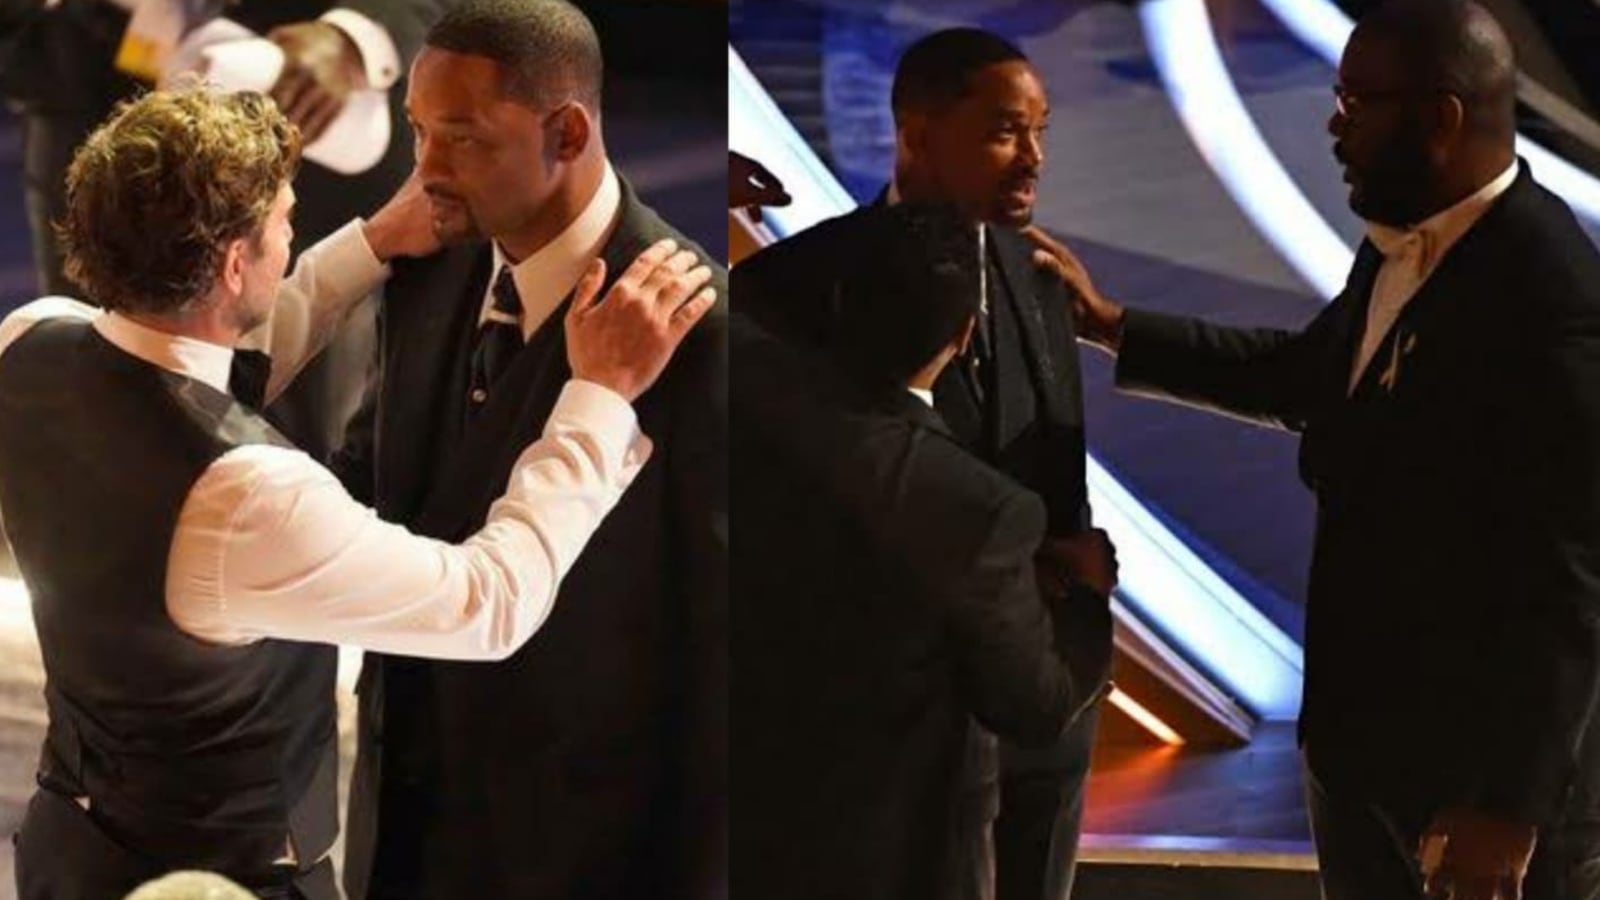 Video shows Will Smith being consoled by Denzel Washington, Bradley Cooper after Chris Rock slap. Watch